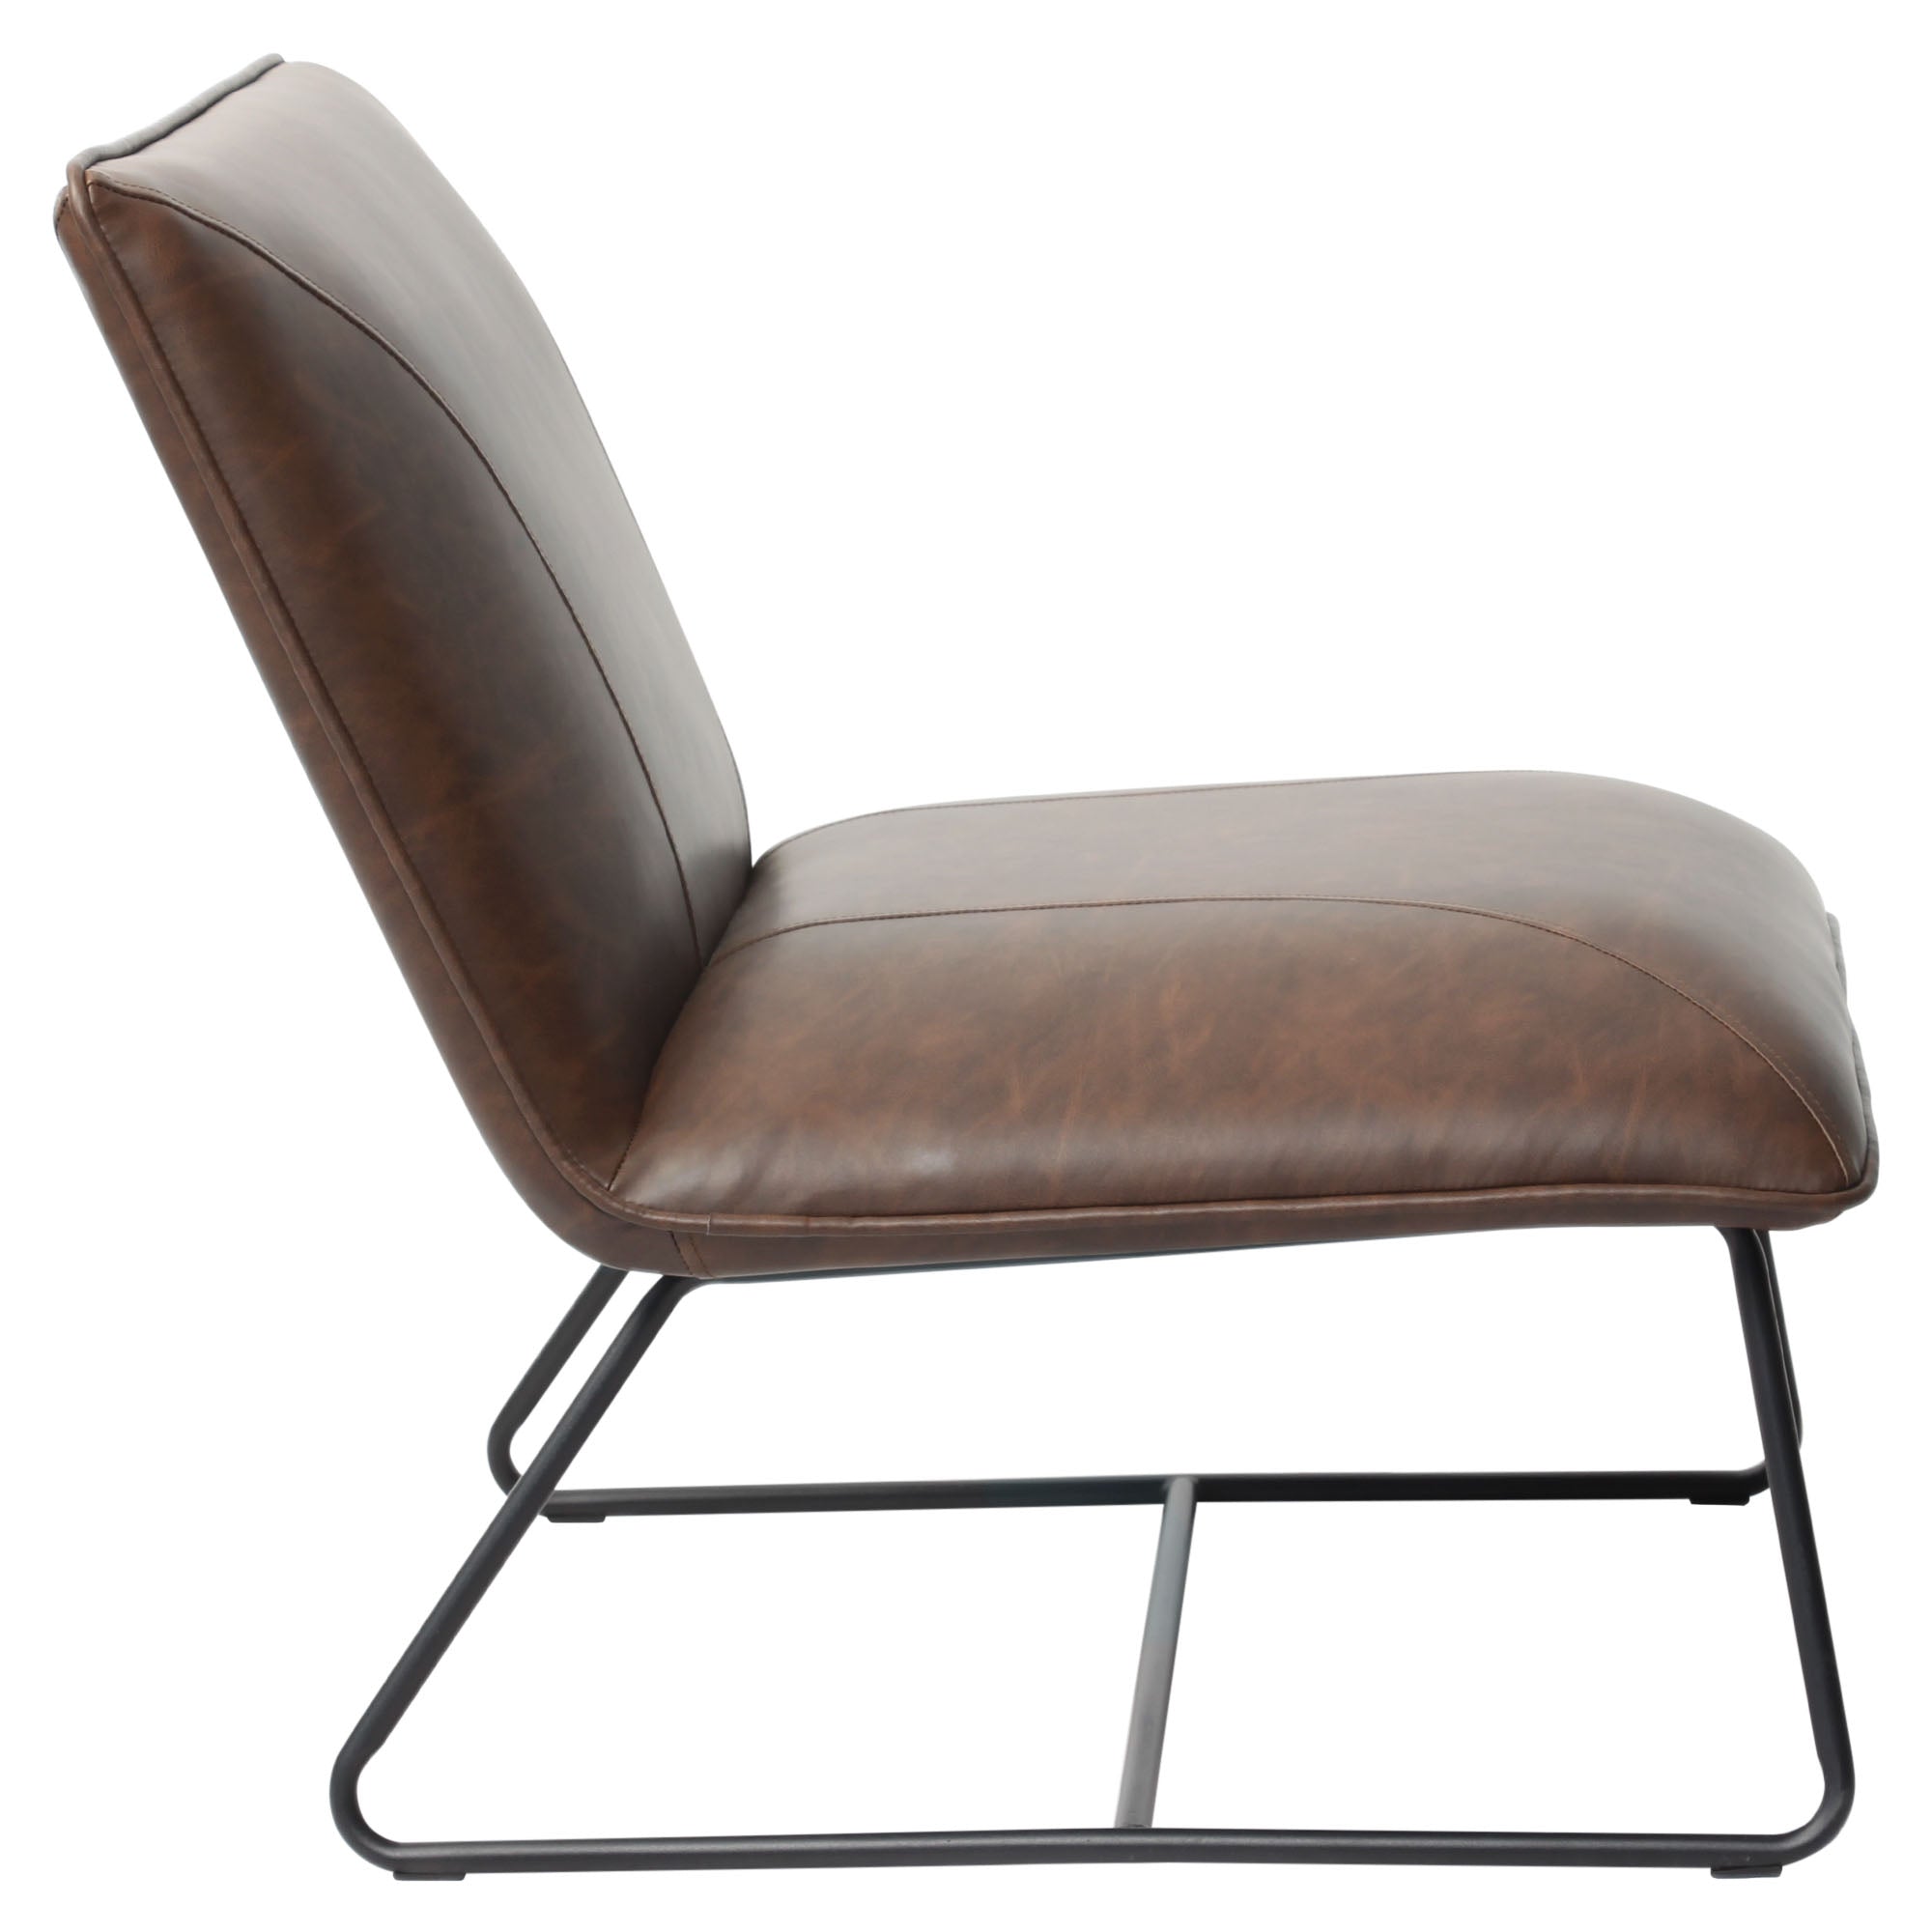 Diamond Sofa Jordan Armless Accent Chair in Chocolate Leatherette with Chrome Metal Base